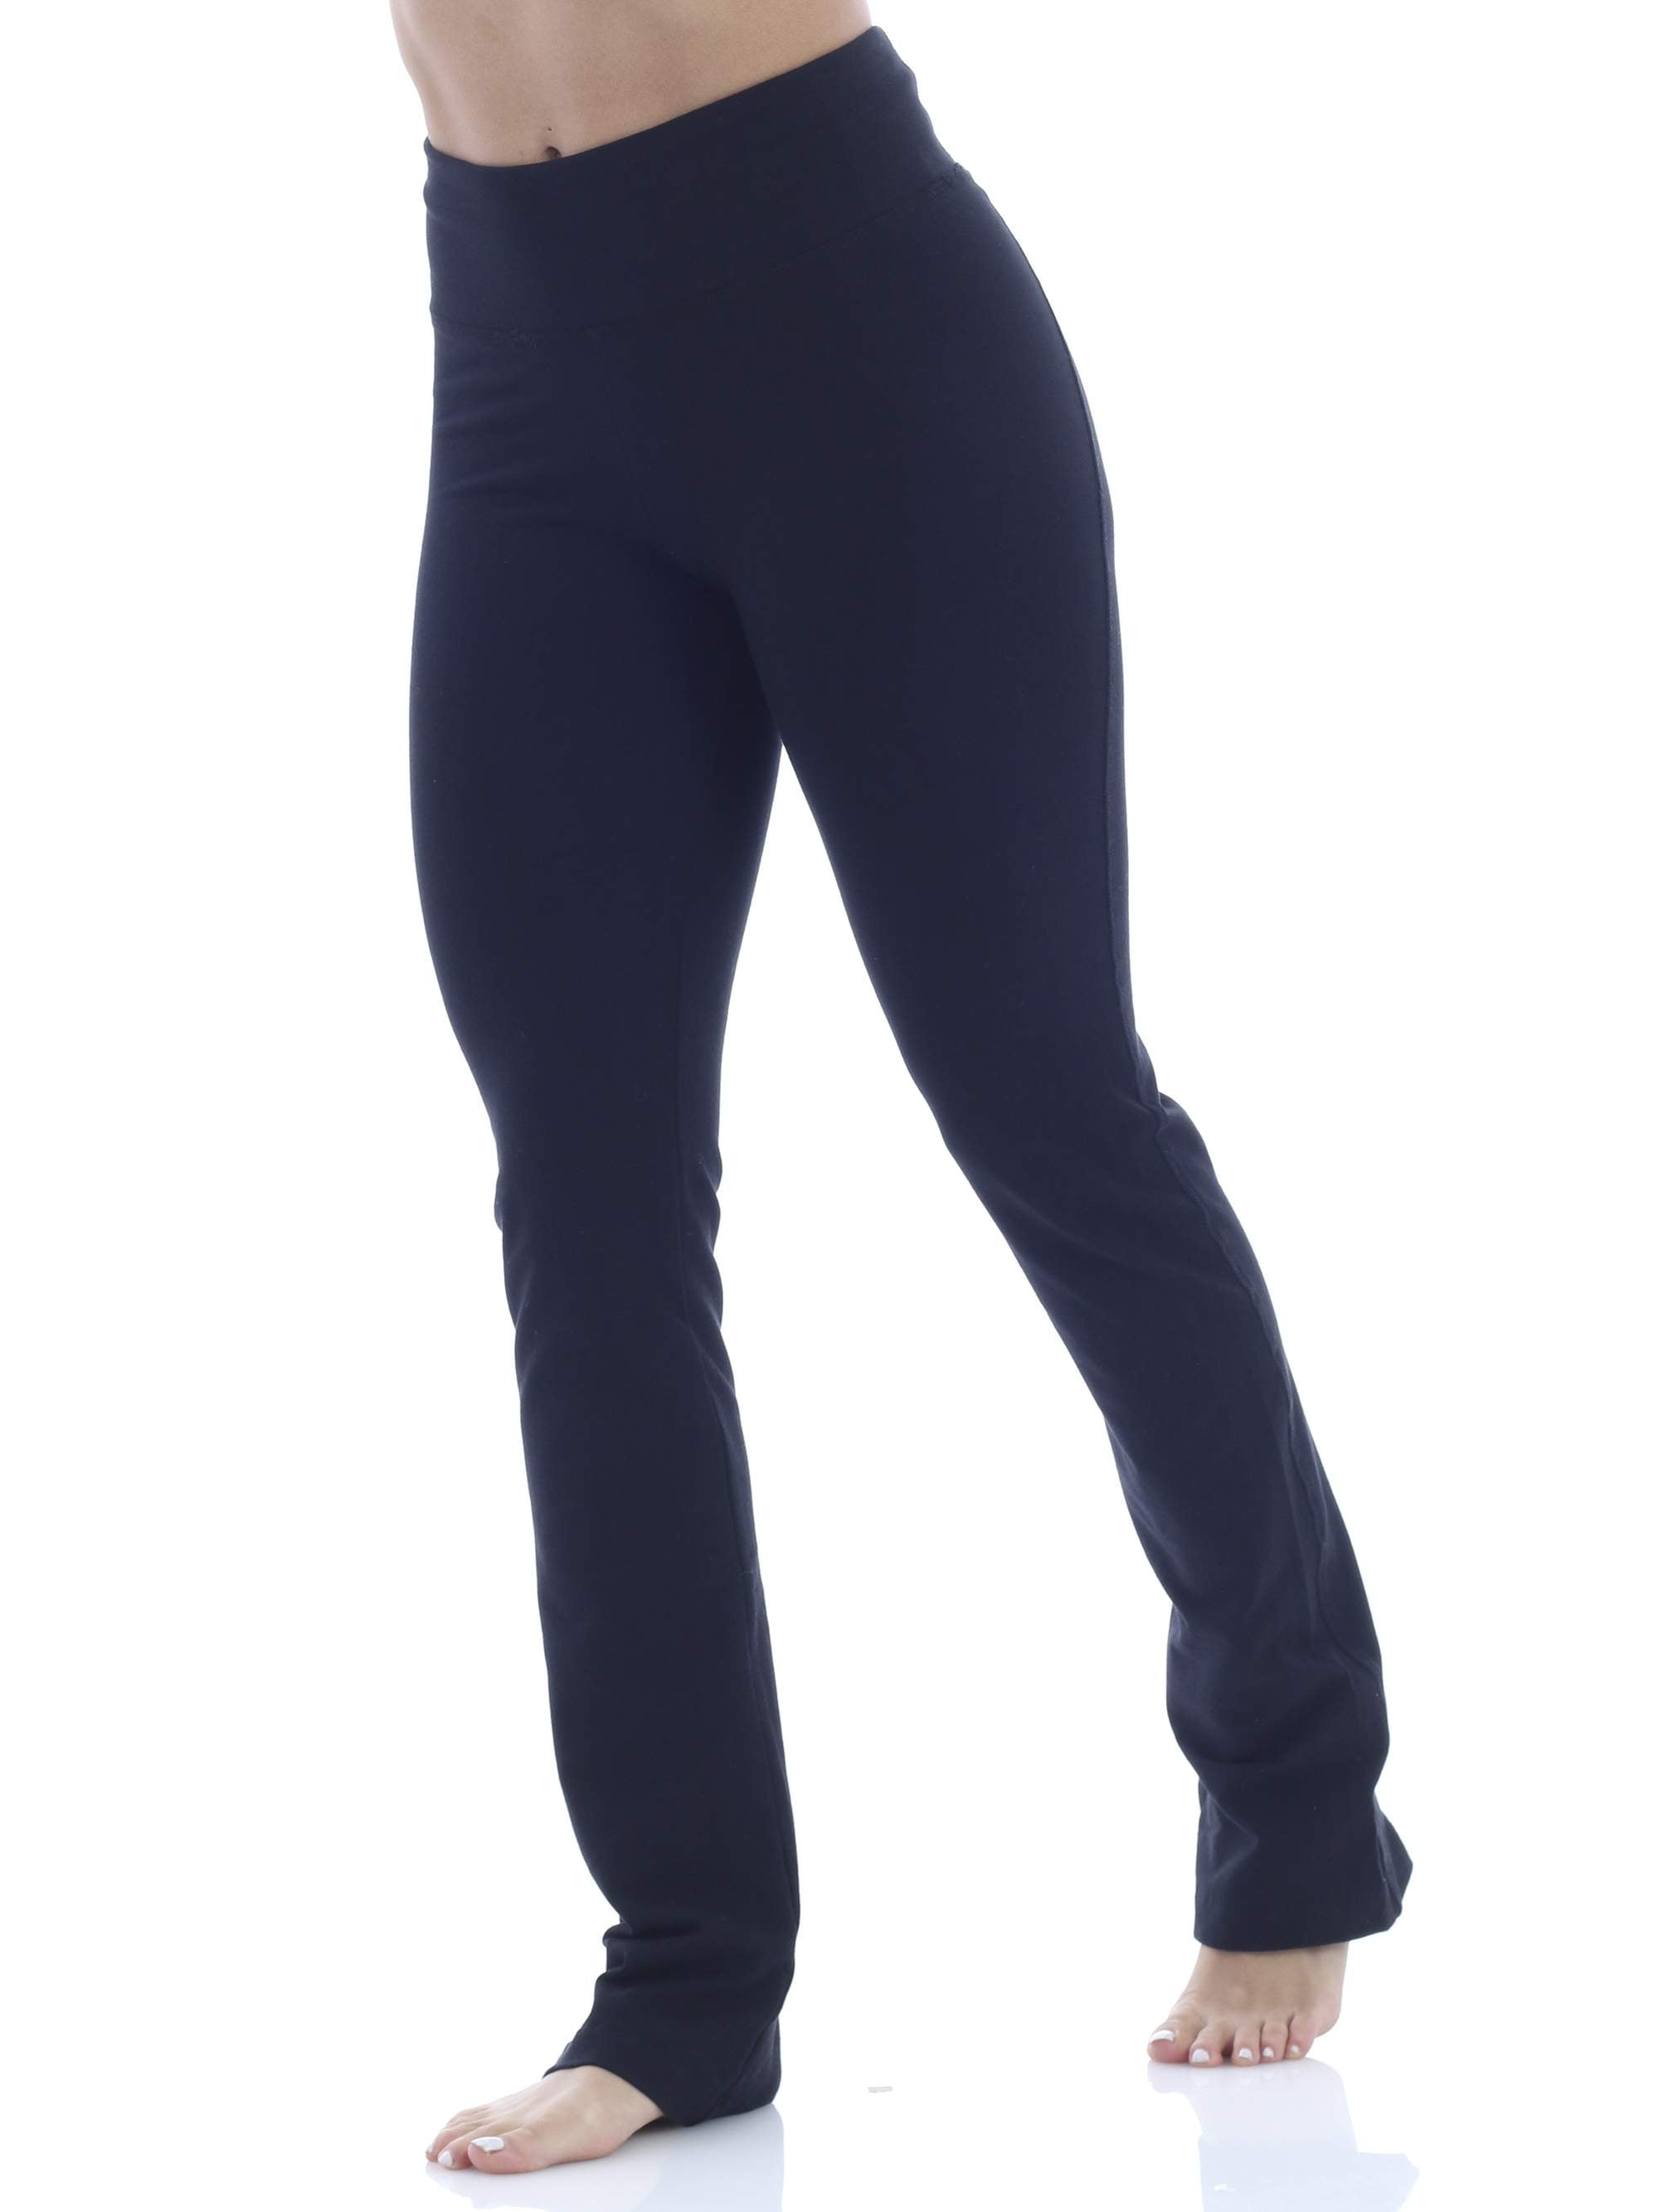 relaxed fit yoga pants